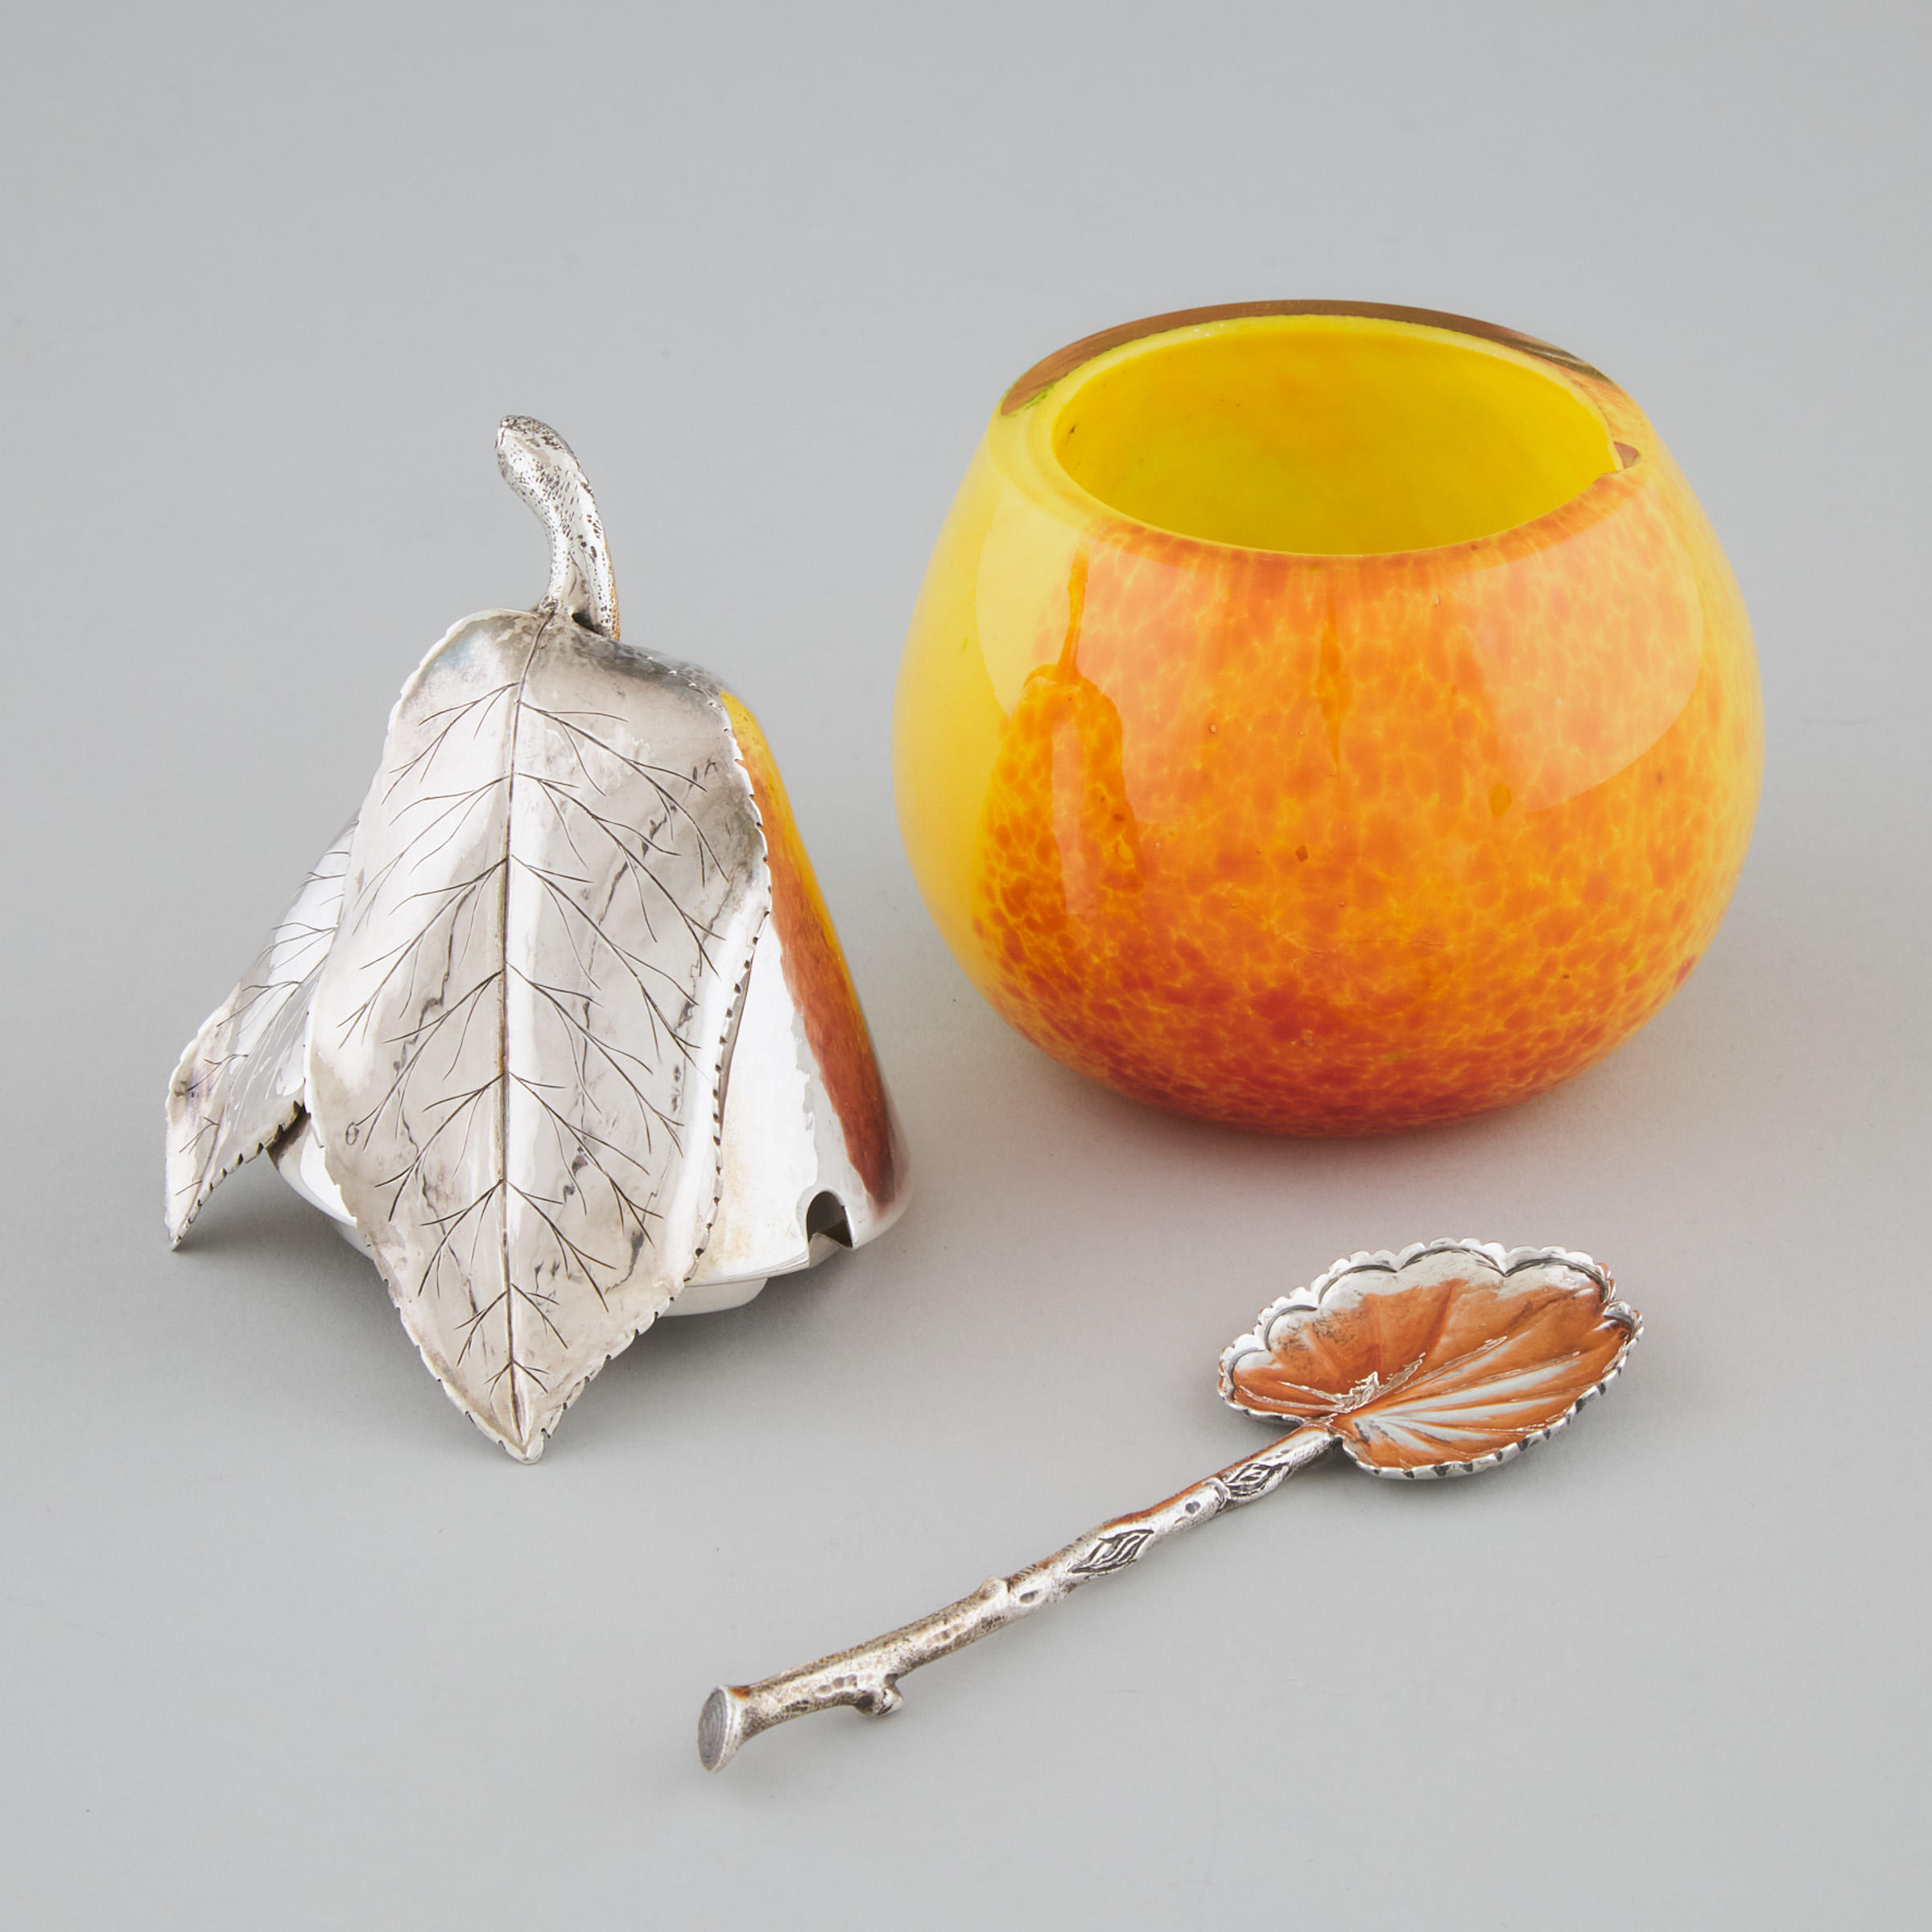 Italian Silver and Coloured Glass Pear-Form Preserve Jar with Spoon, Buccellati, Milan, 20th century